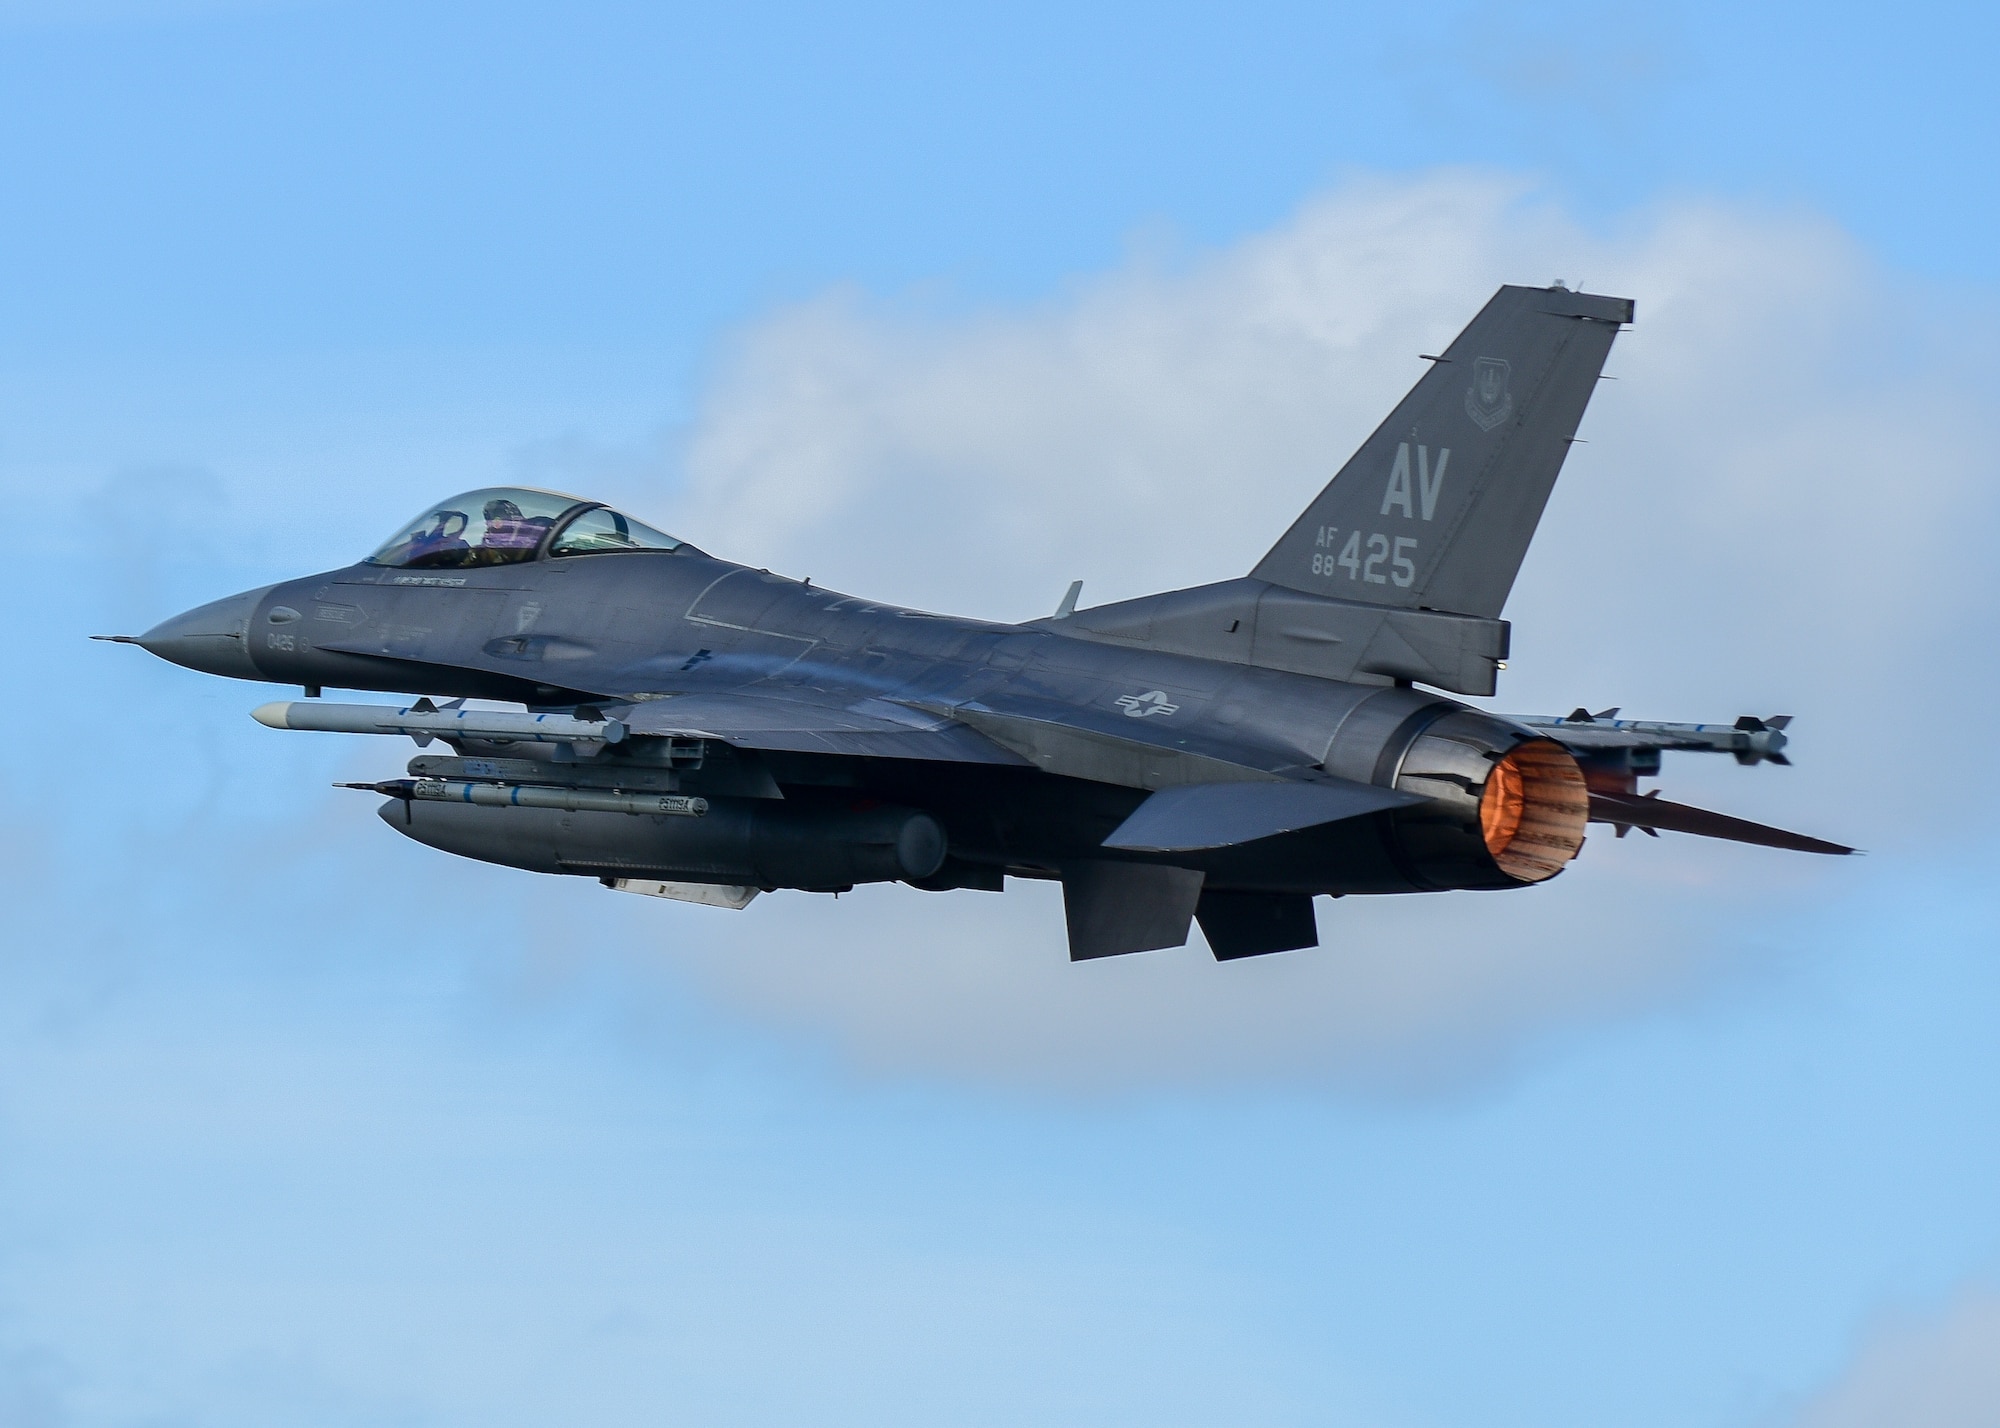 A U.S. Air Force F-16D Fighting Falcon assigned to the 555th Fighter Squadron from the 31st Fighter Wing, Aviano Air Base, Italy, takes flight